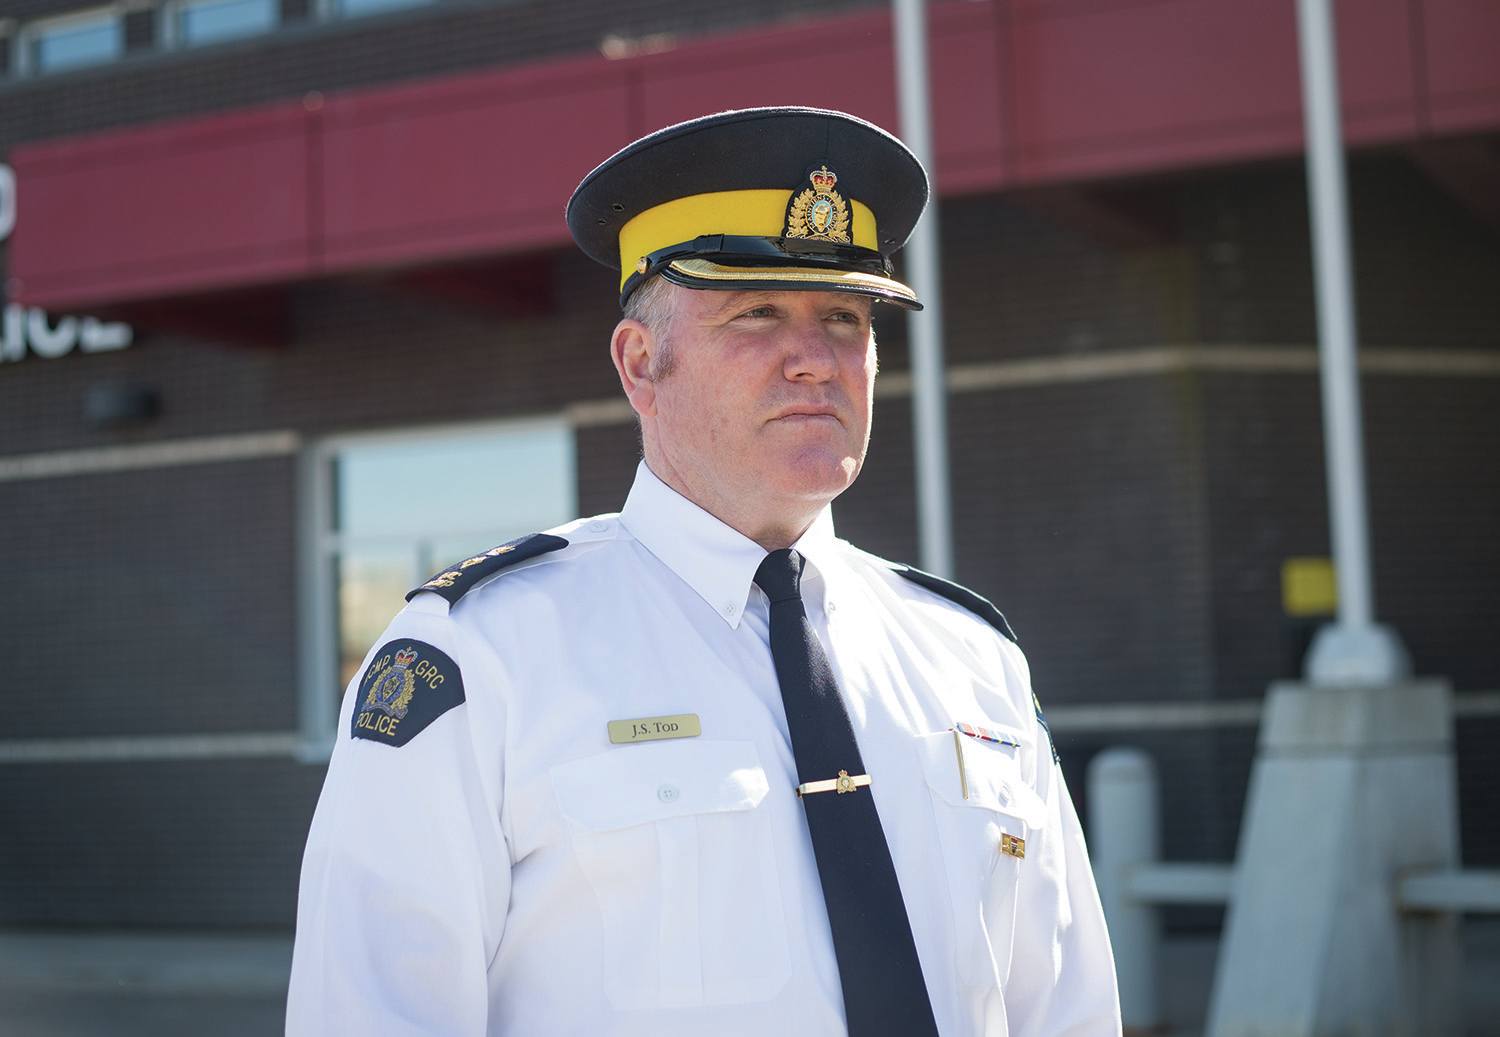 NEW ROLE - RCMP Supt. Scott Tod reflected on his time with the RCMP at the downtown detachment in Red Deer. After 28 years in the RCMP